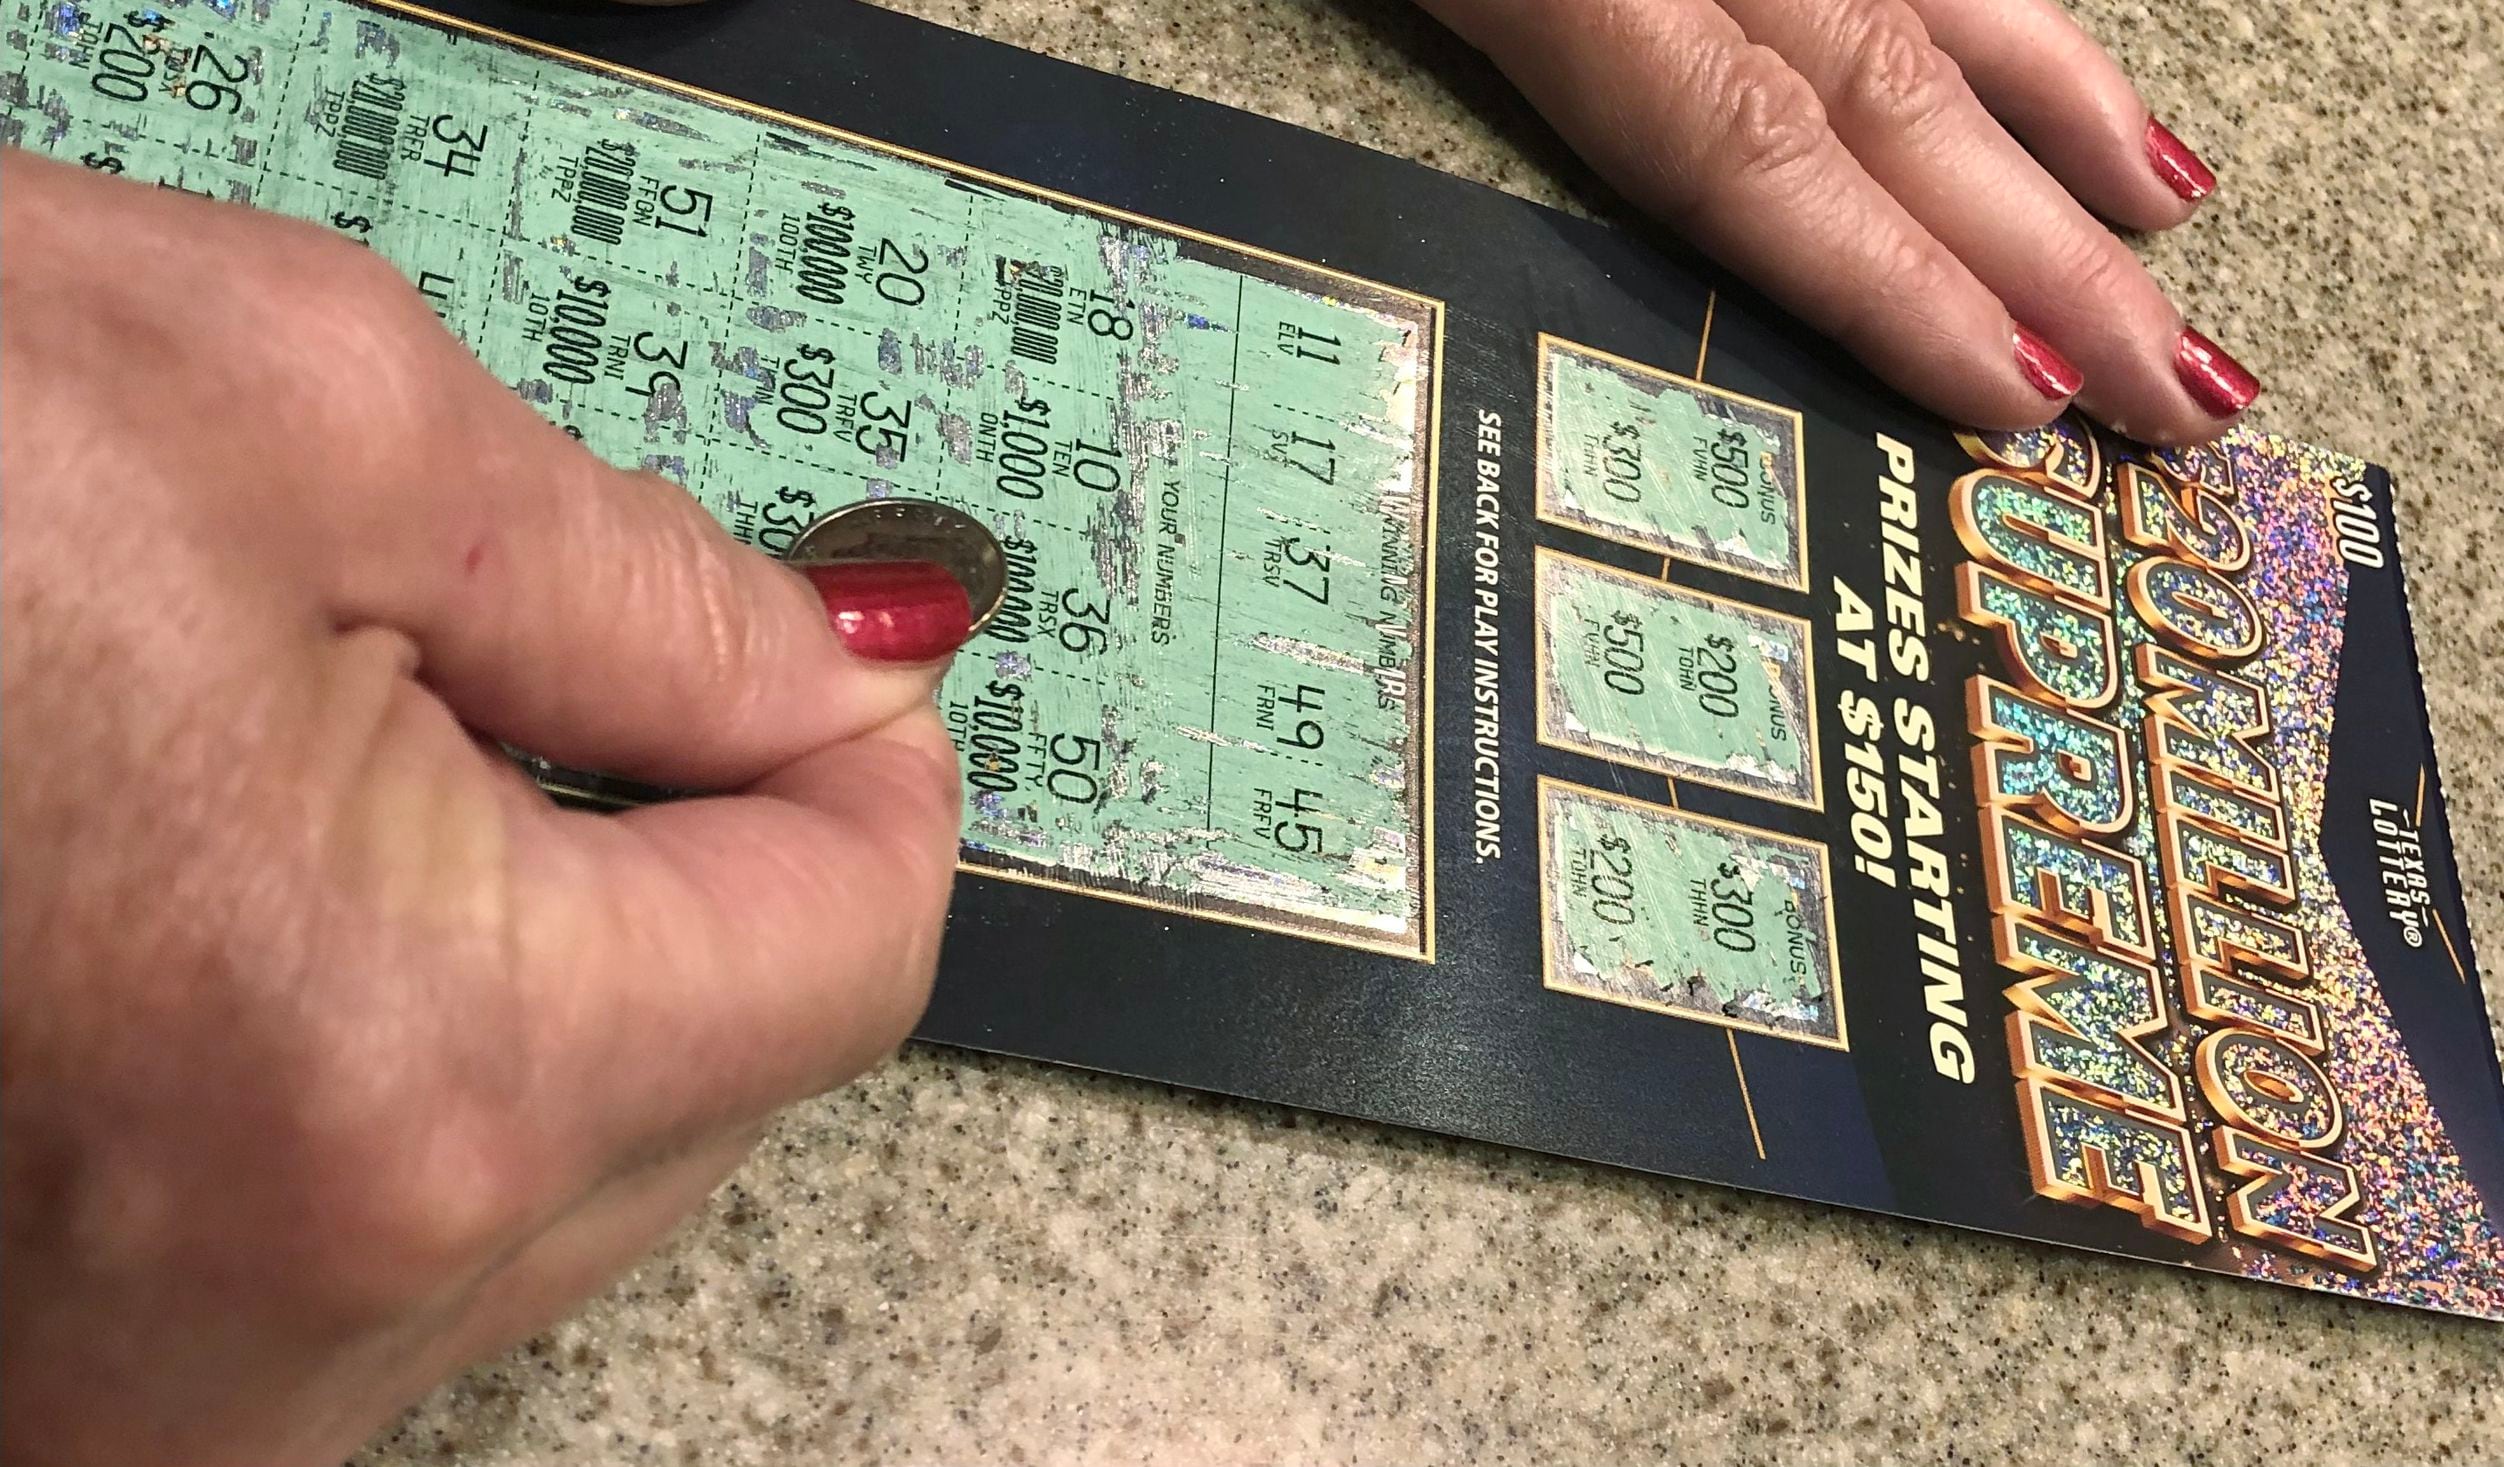 We spent $1 Million on lottery tickets! Go see if we won big